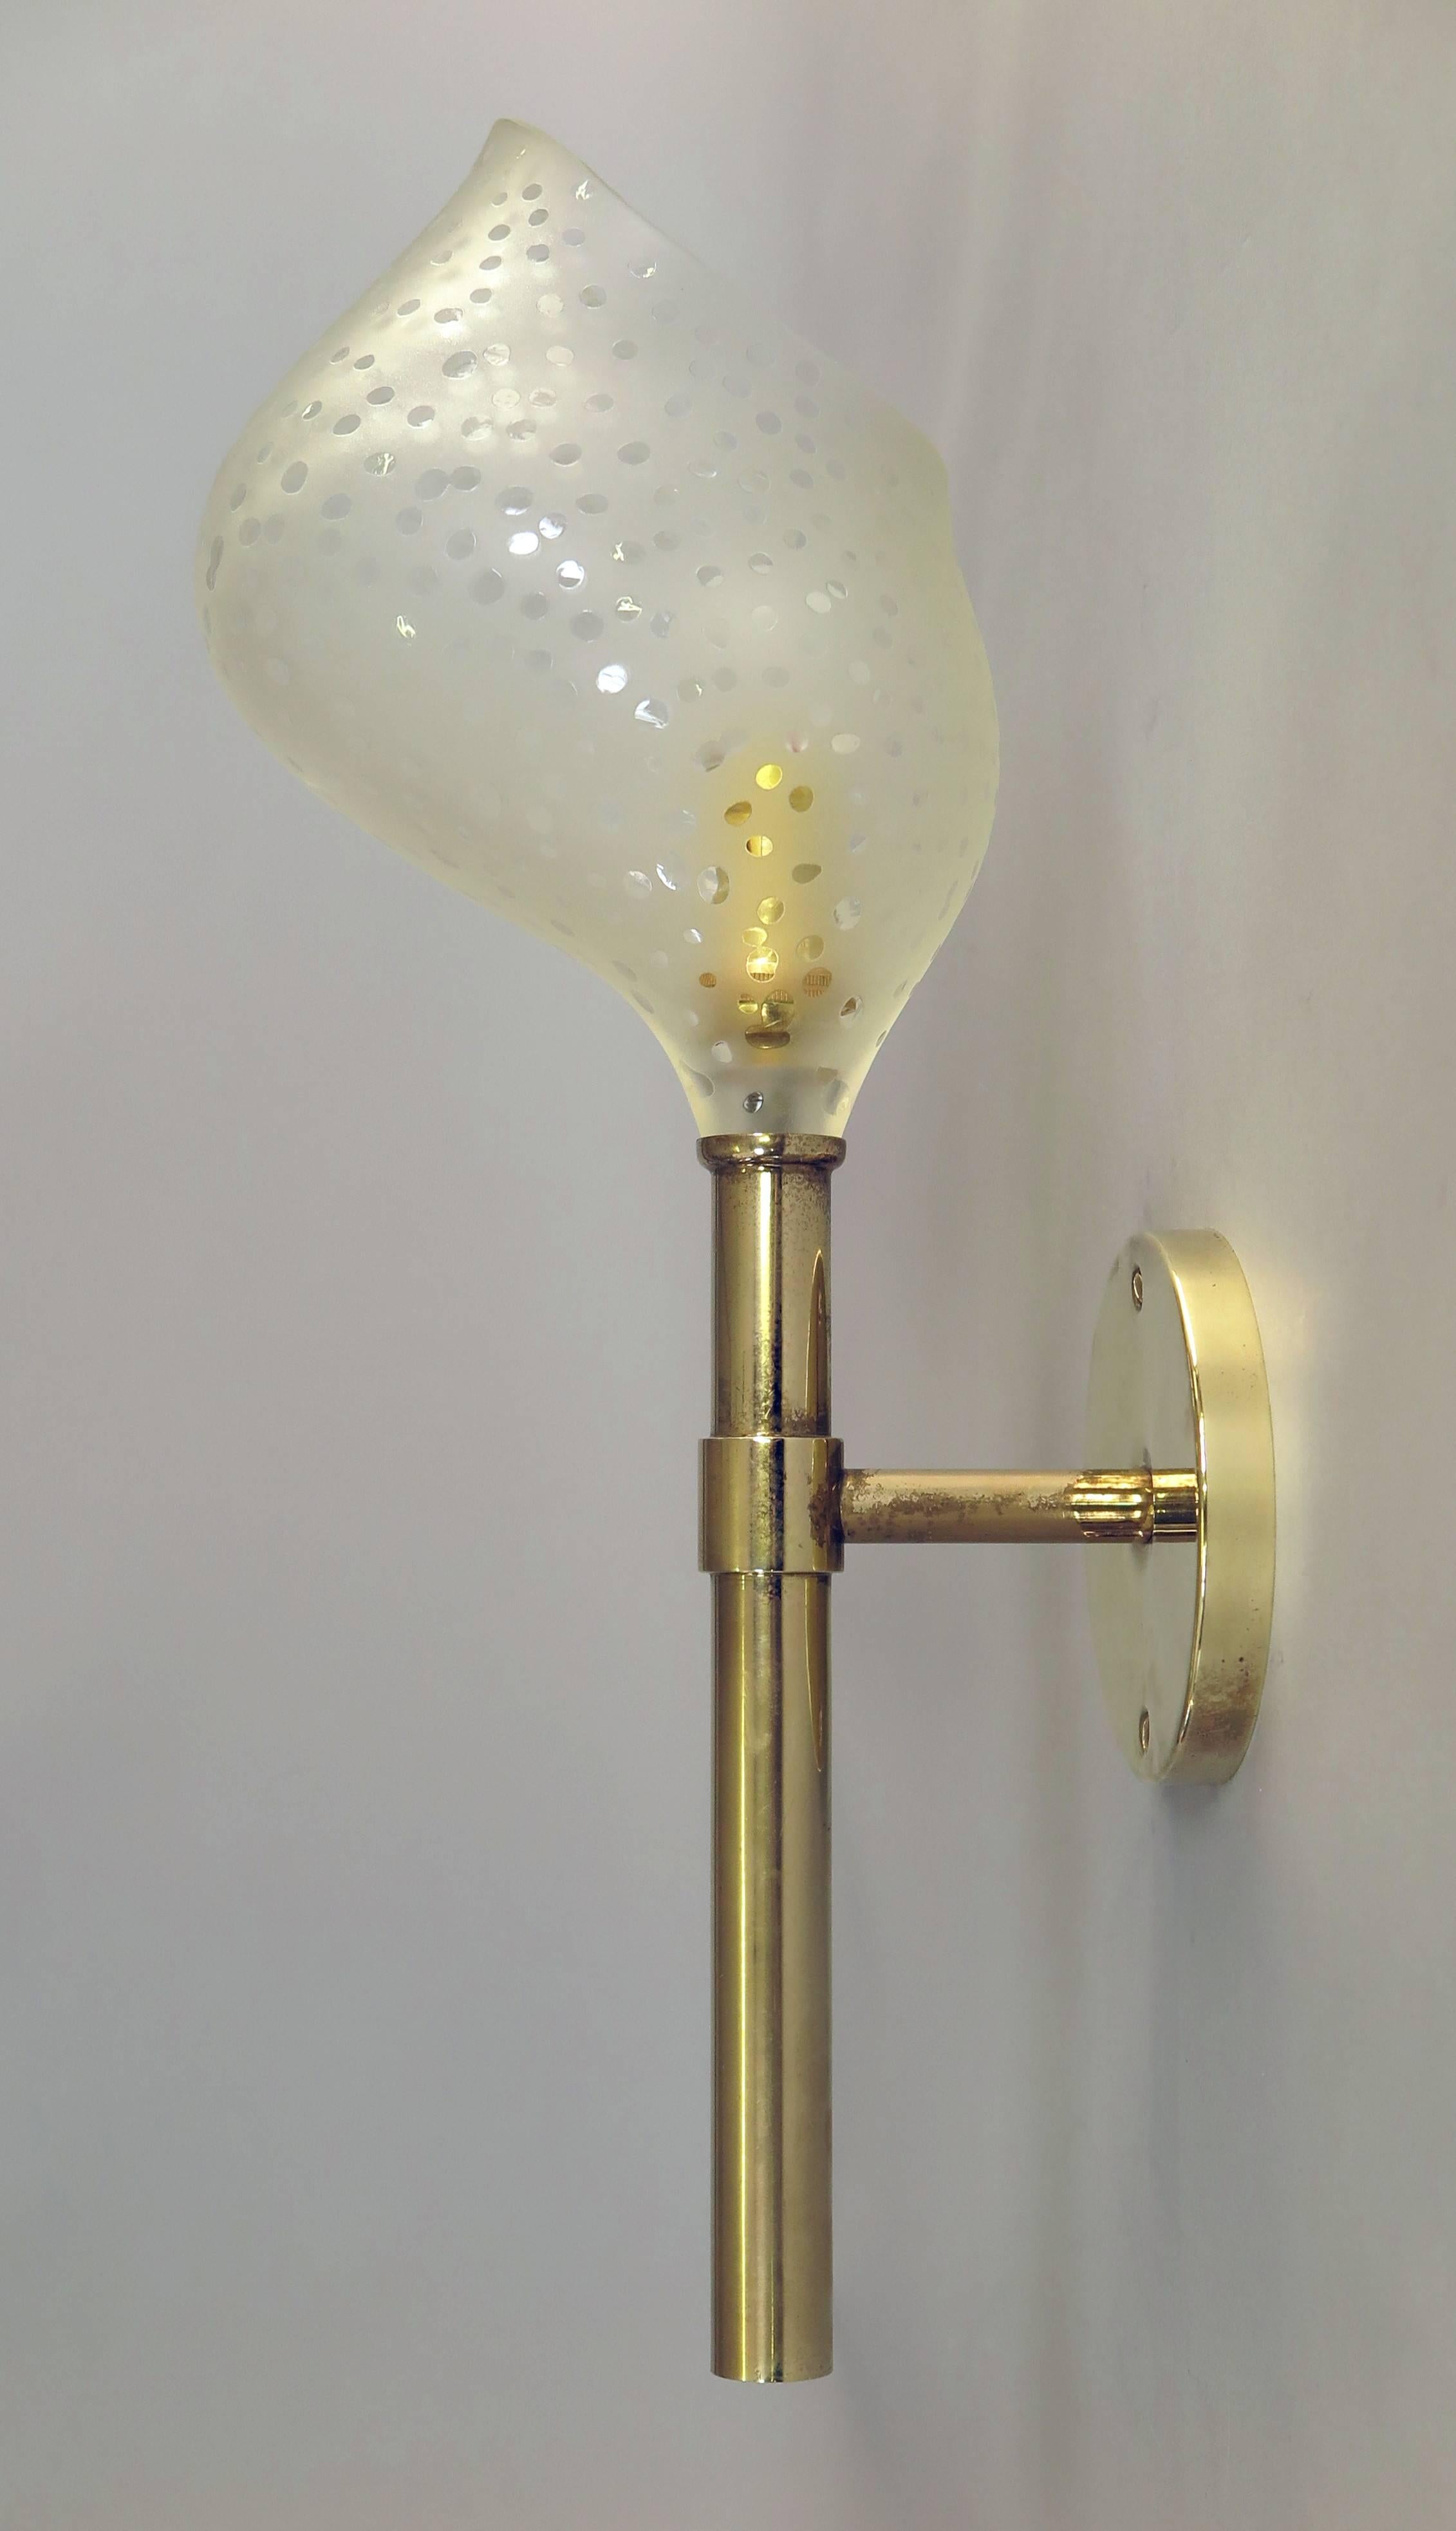 Brass sconces with flecked glass shades who give unique shadowgraphs,
rewired, bayonet lamp socket.